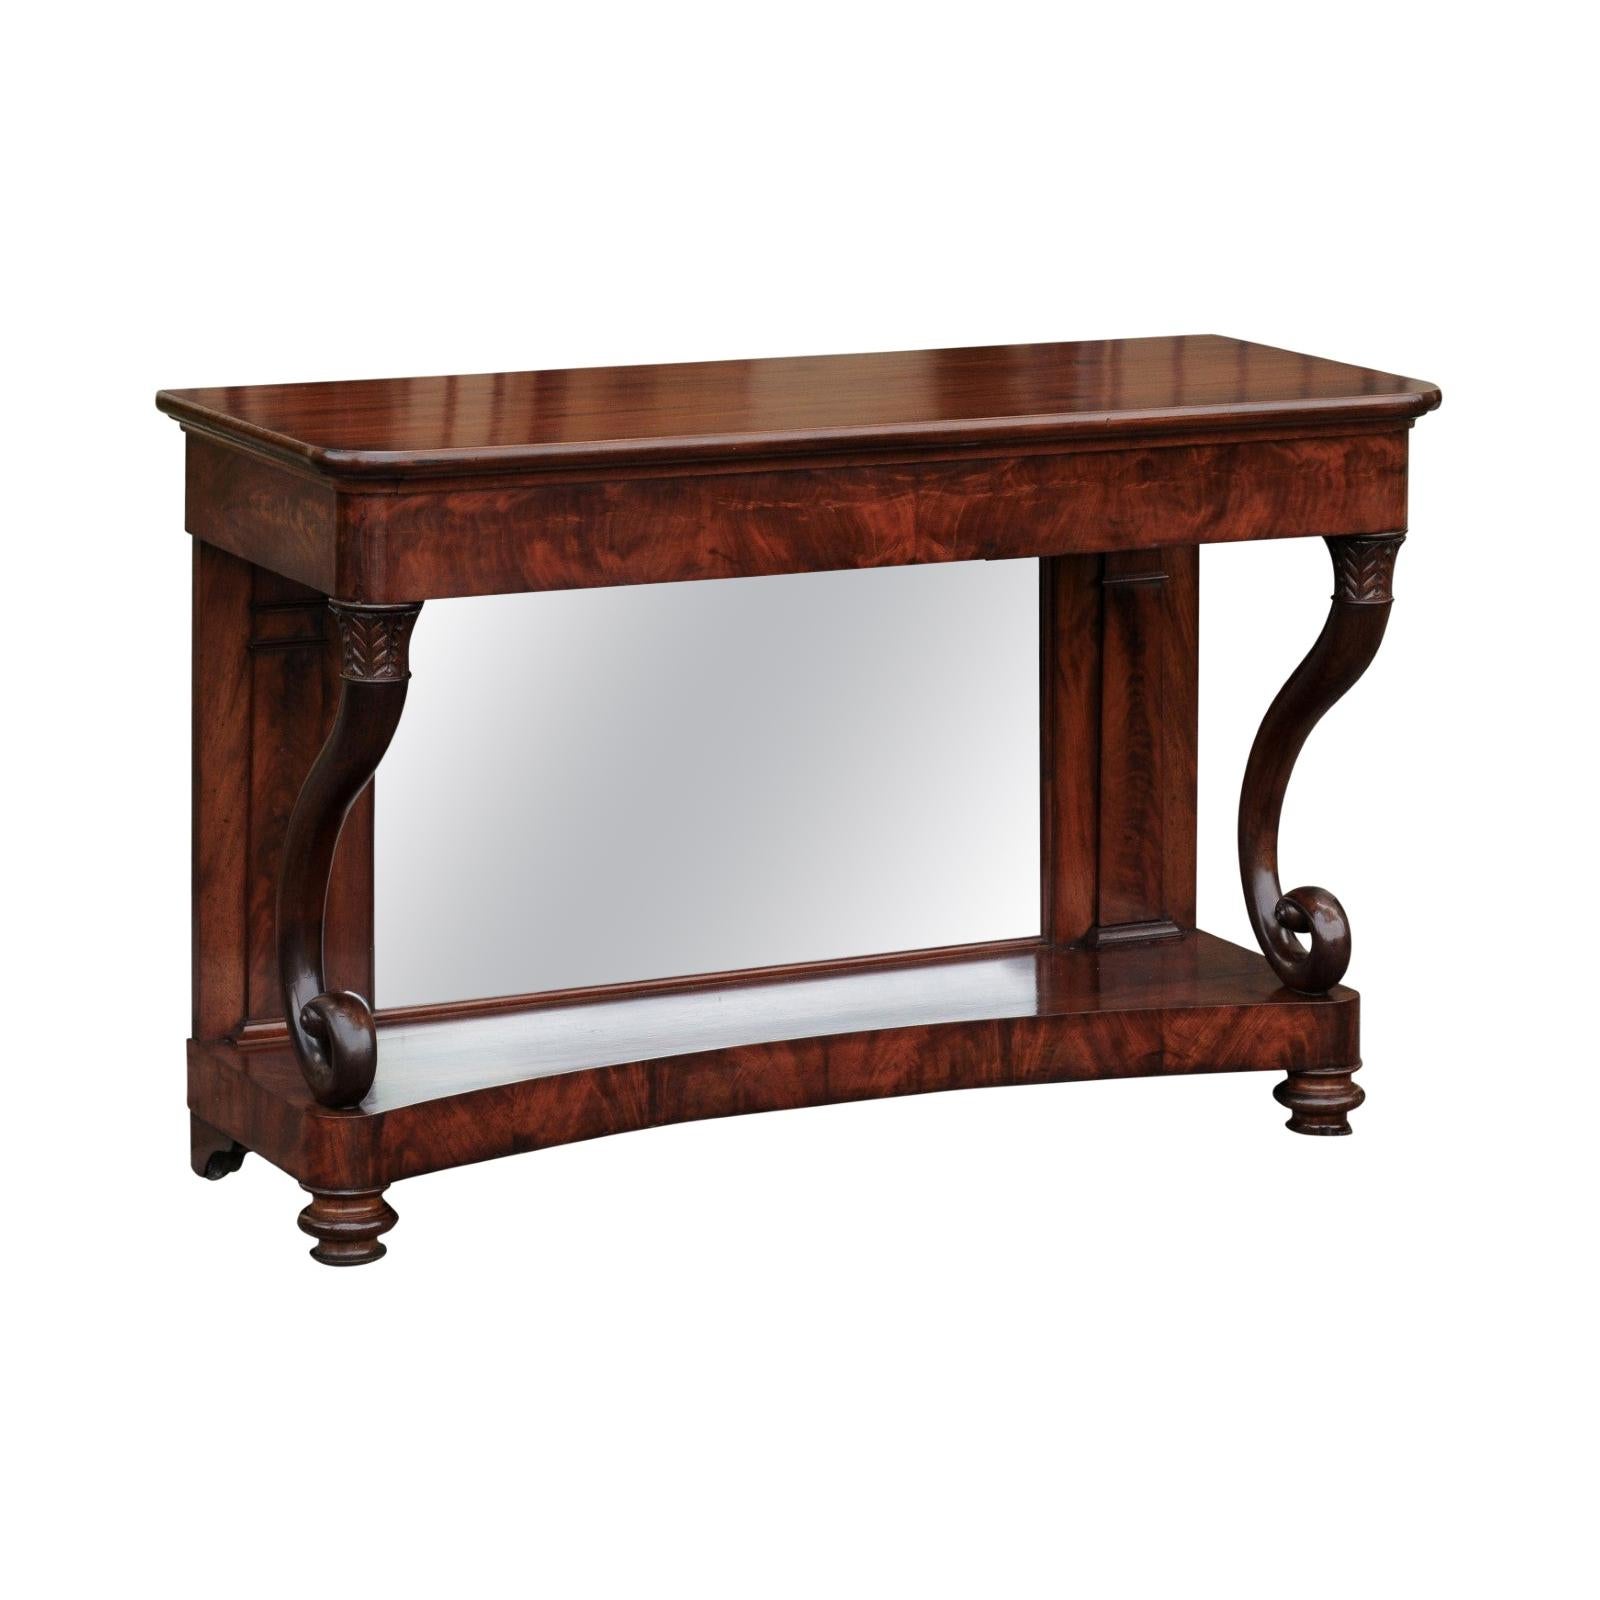 French Charles X Period 1830s Mahogany Console Table with Cornucopia Legs For Sale